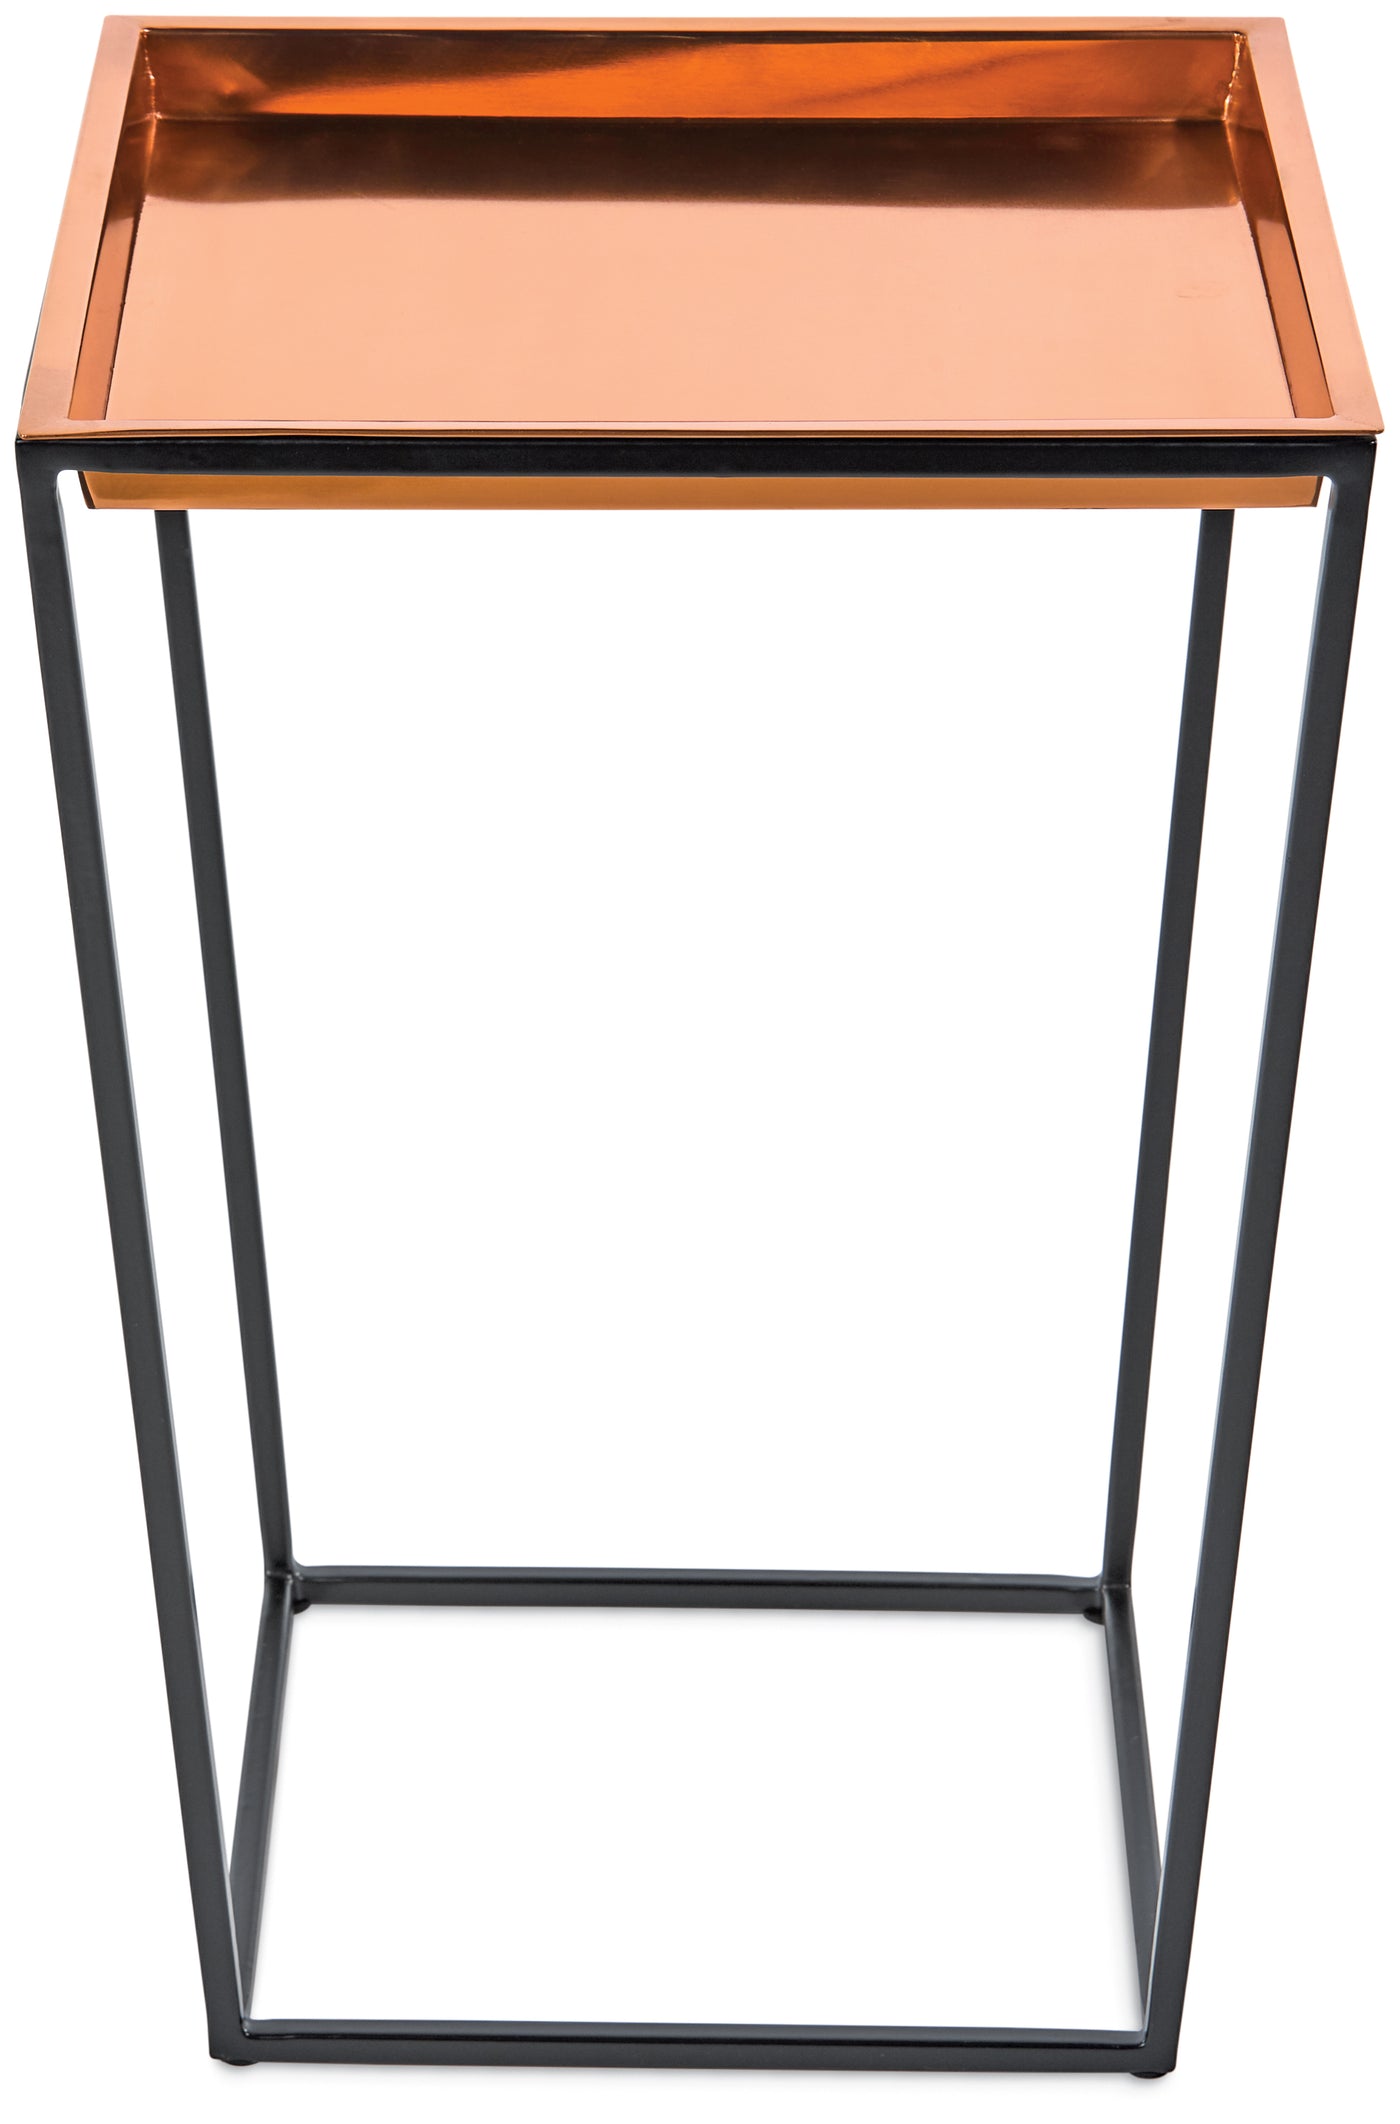 Copper Tray Table